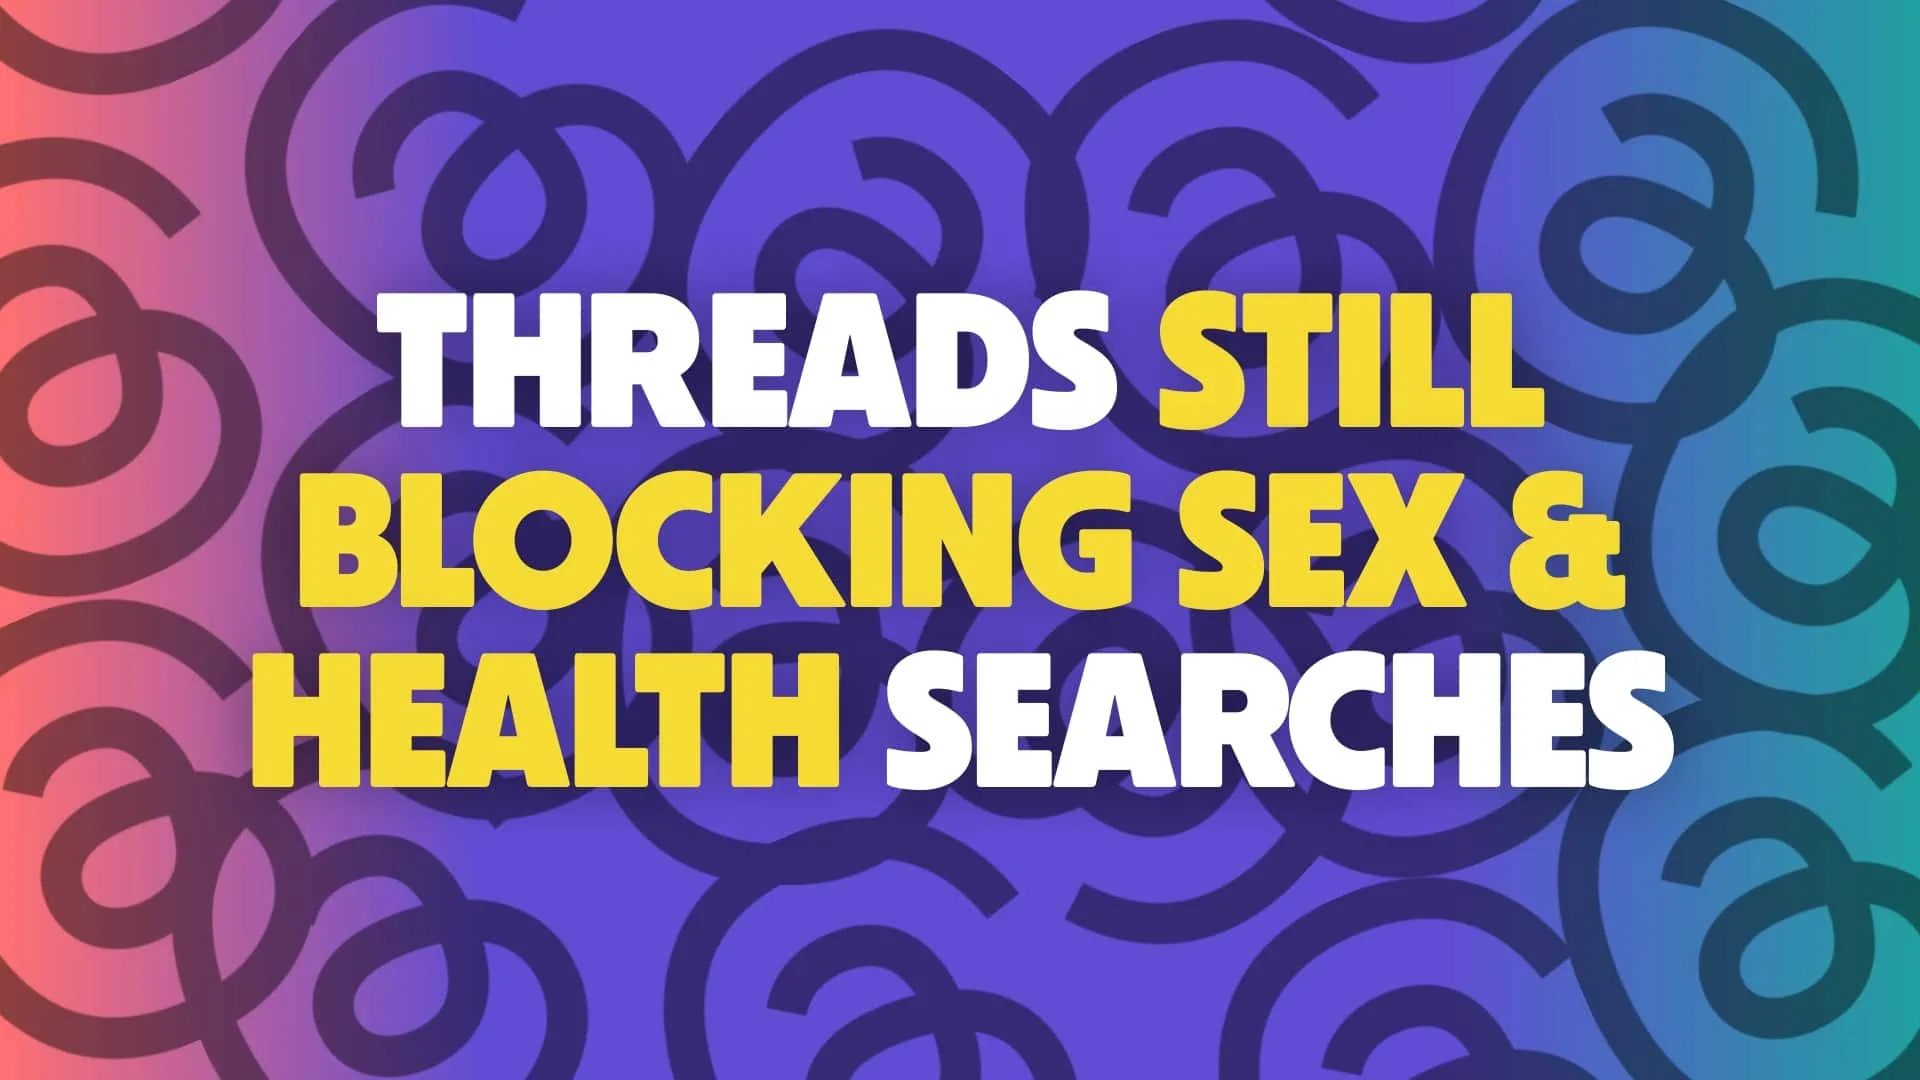 Blocked Sex Com - Threads is Still Blocking Sex and Health-related Searches